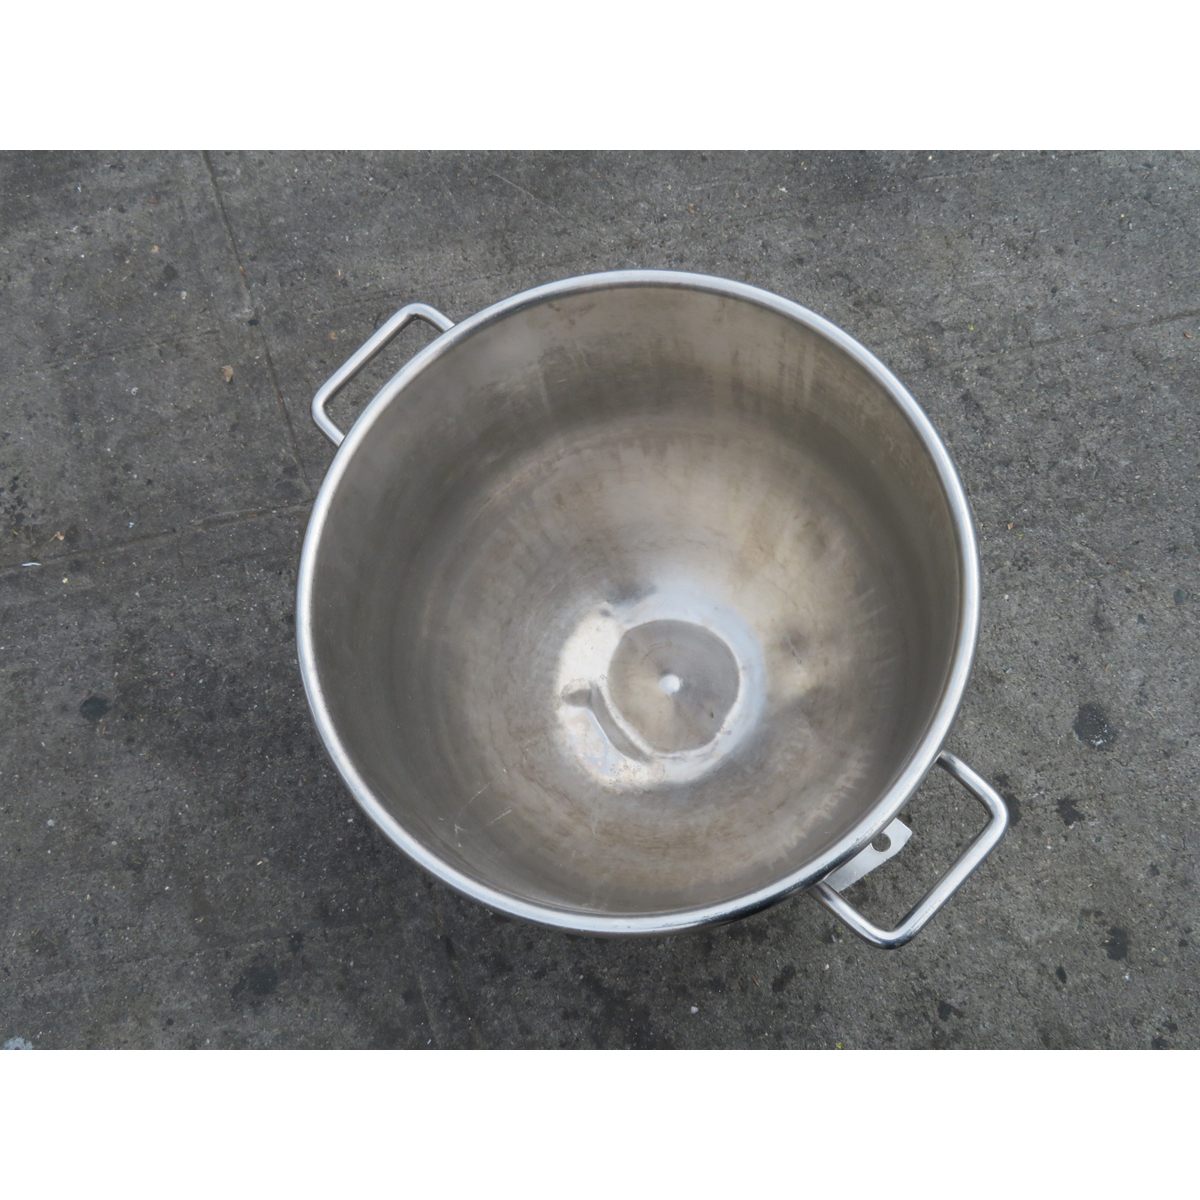 Hobart VMLHP40 80-40 Stainless Steel Mixer Bowl, Used Great Condition image 1